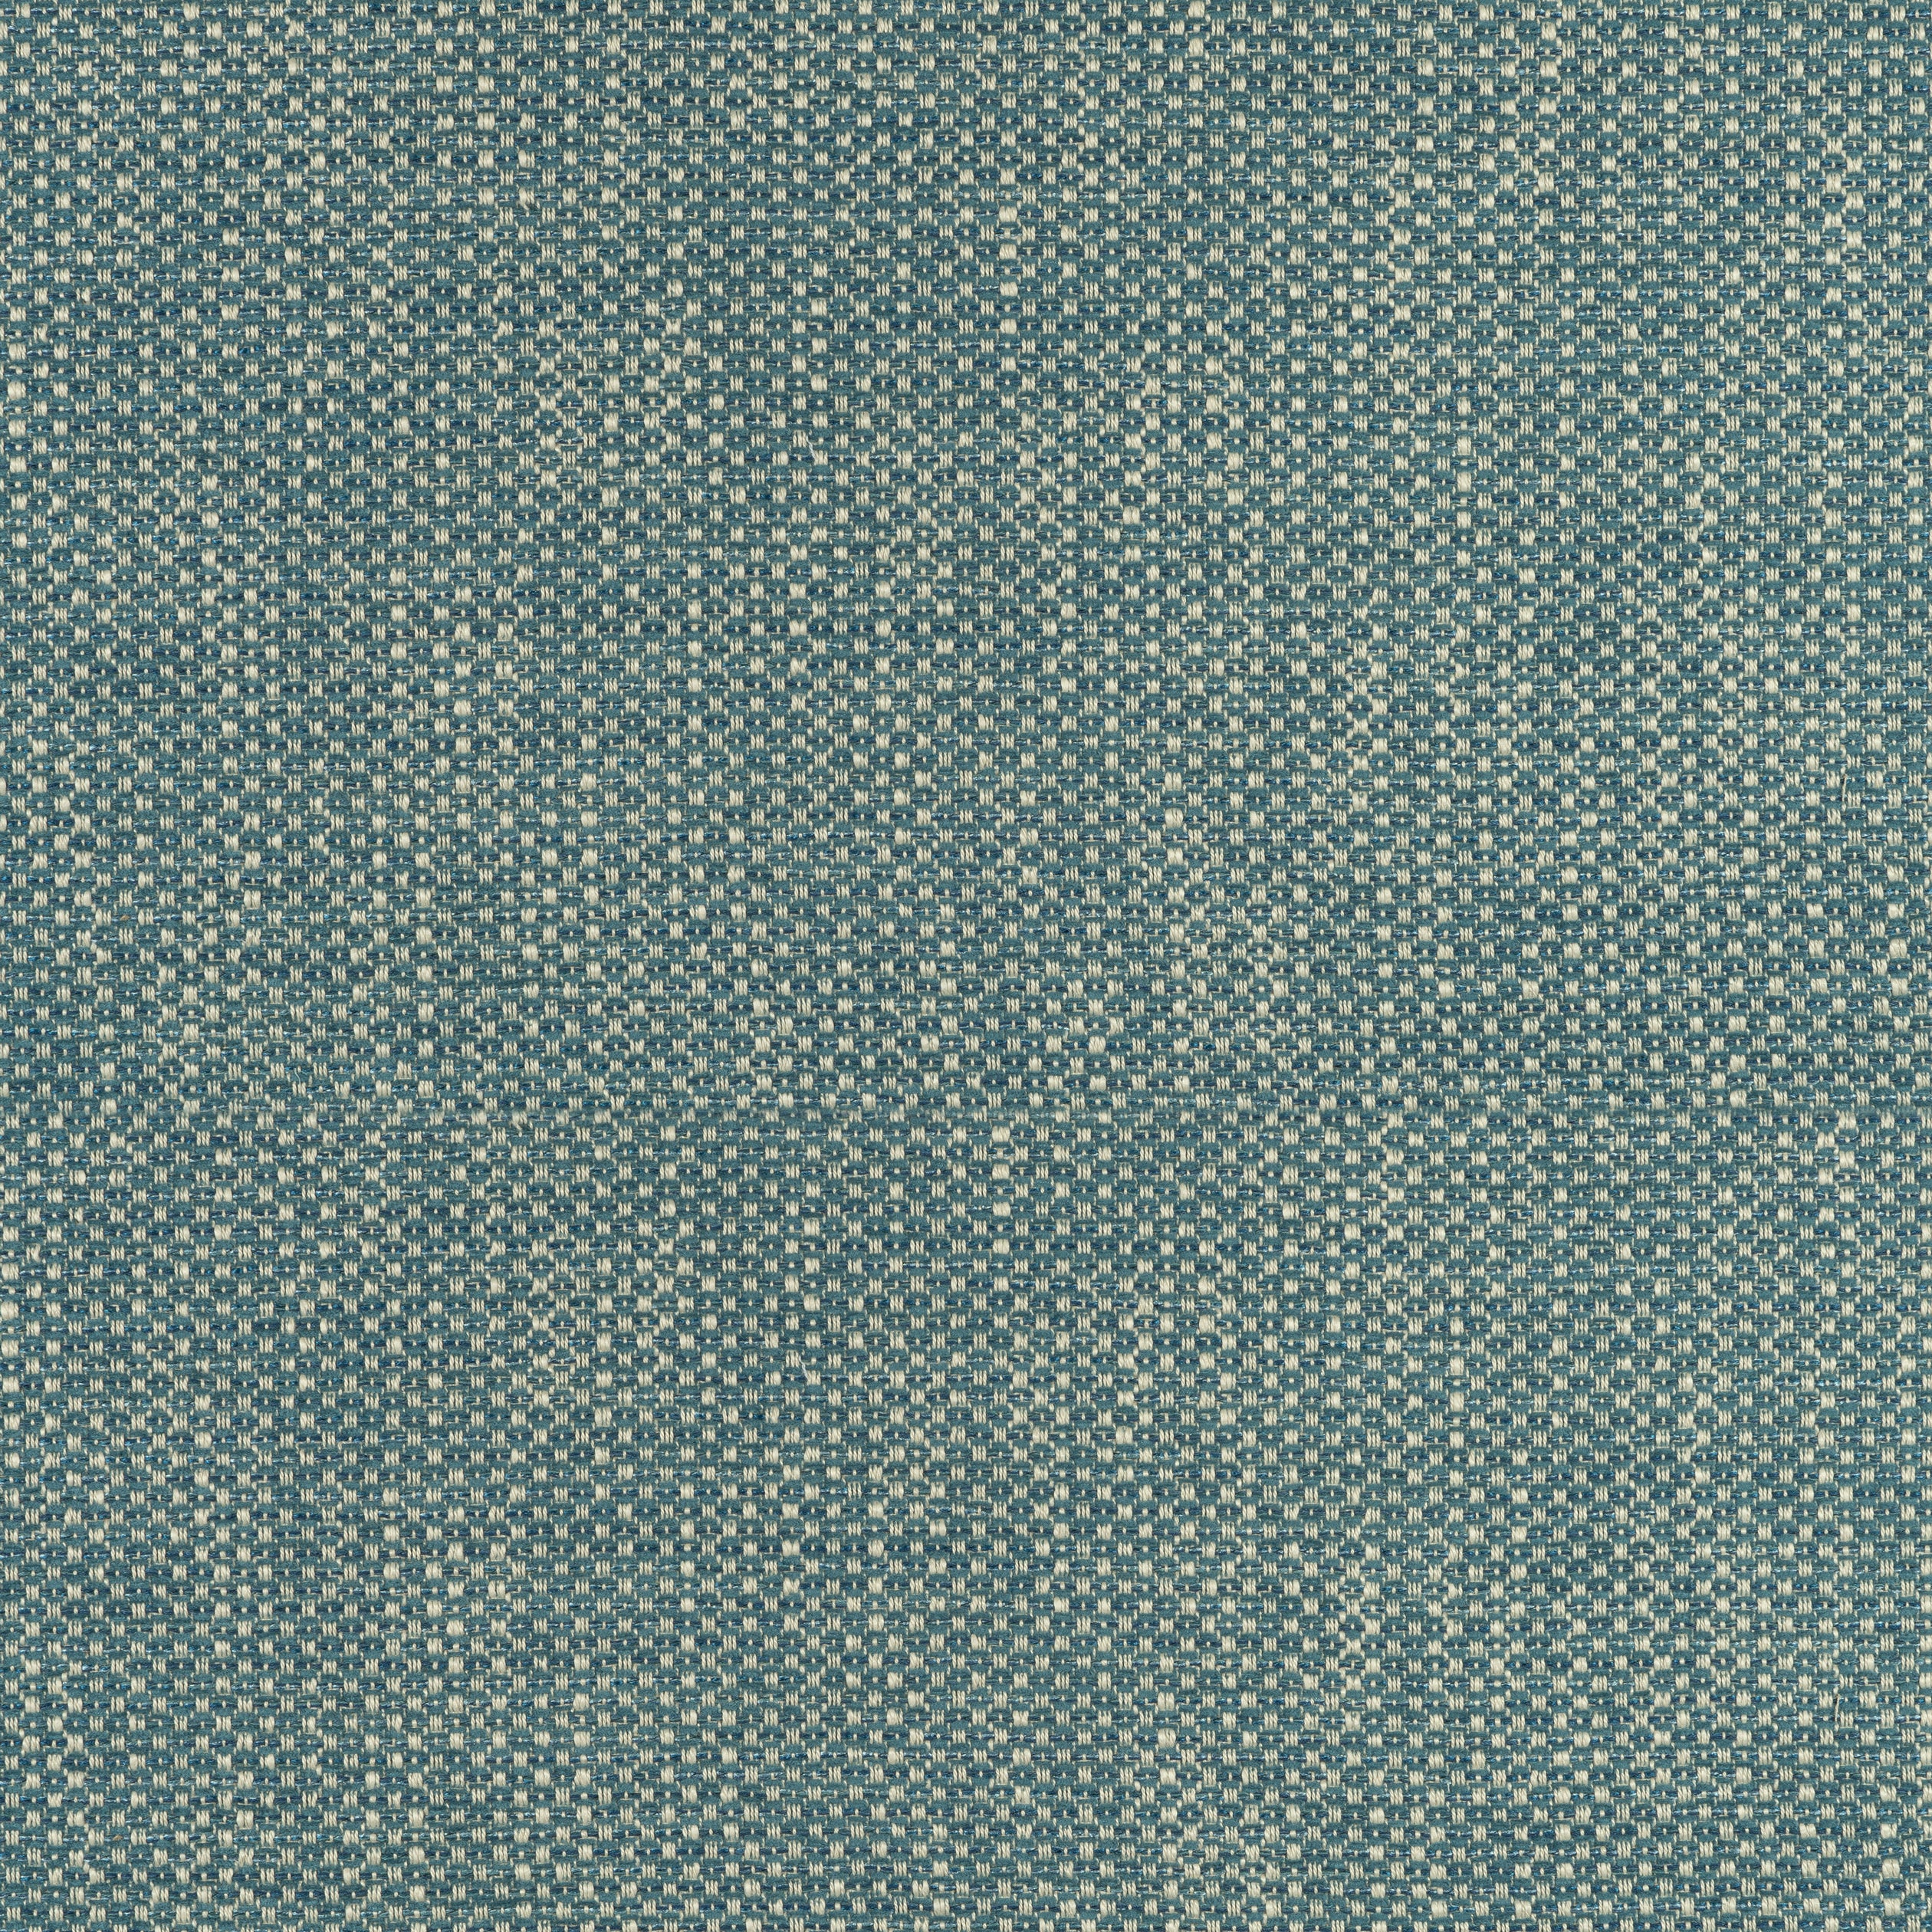 Cascade fabric in peacock color - pattern number W75264 - by Thibaut in the Elements collection